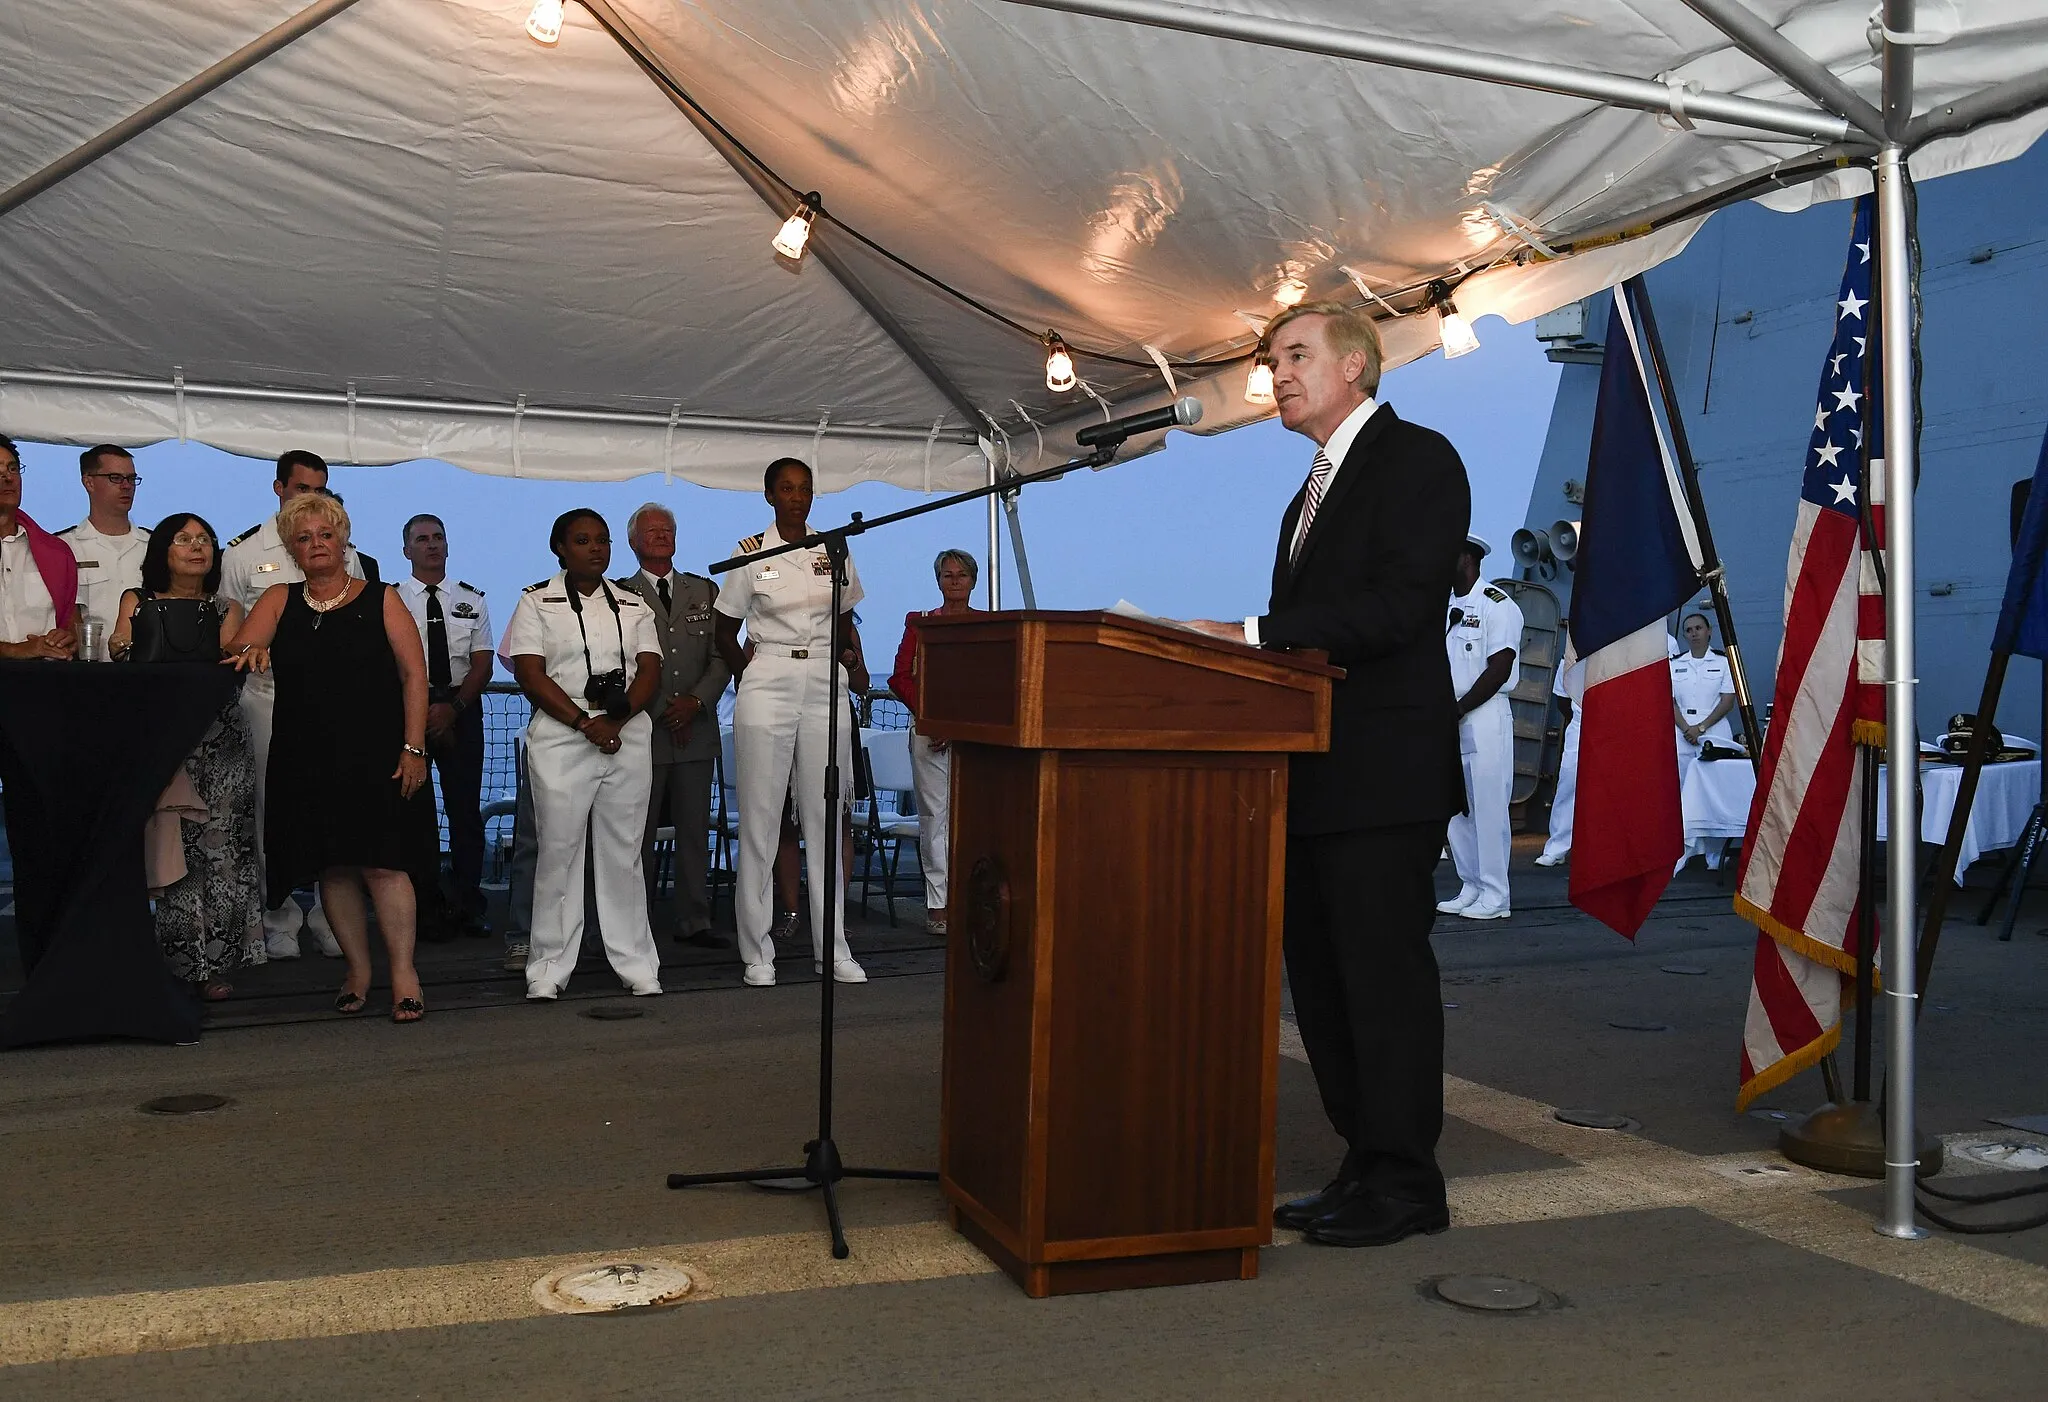 Photo showing: 170815-N-UY653-545

THEOULE-SUR-MER, France (Aug. 15, 2017) Brent Hardt, charge d'affaires, U.S. Embassy, Paris, delivers remarks during a reception aboard the Arleigh Burke-class guided-missile destroyer USS Oscar Austin (DDG 79) in Theoule-sur-Mer, France, Aug. 15, 2017. Oscar Austin is in France to participate in events commemorating the 73rd anniversary of Operation Dragoon, the liberation of southern France by allied forces during World War II. (U.S. Navy photo by Mass Communication Specialist 2nd Class Ryan U. Kledzik/Released)